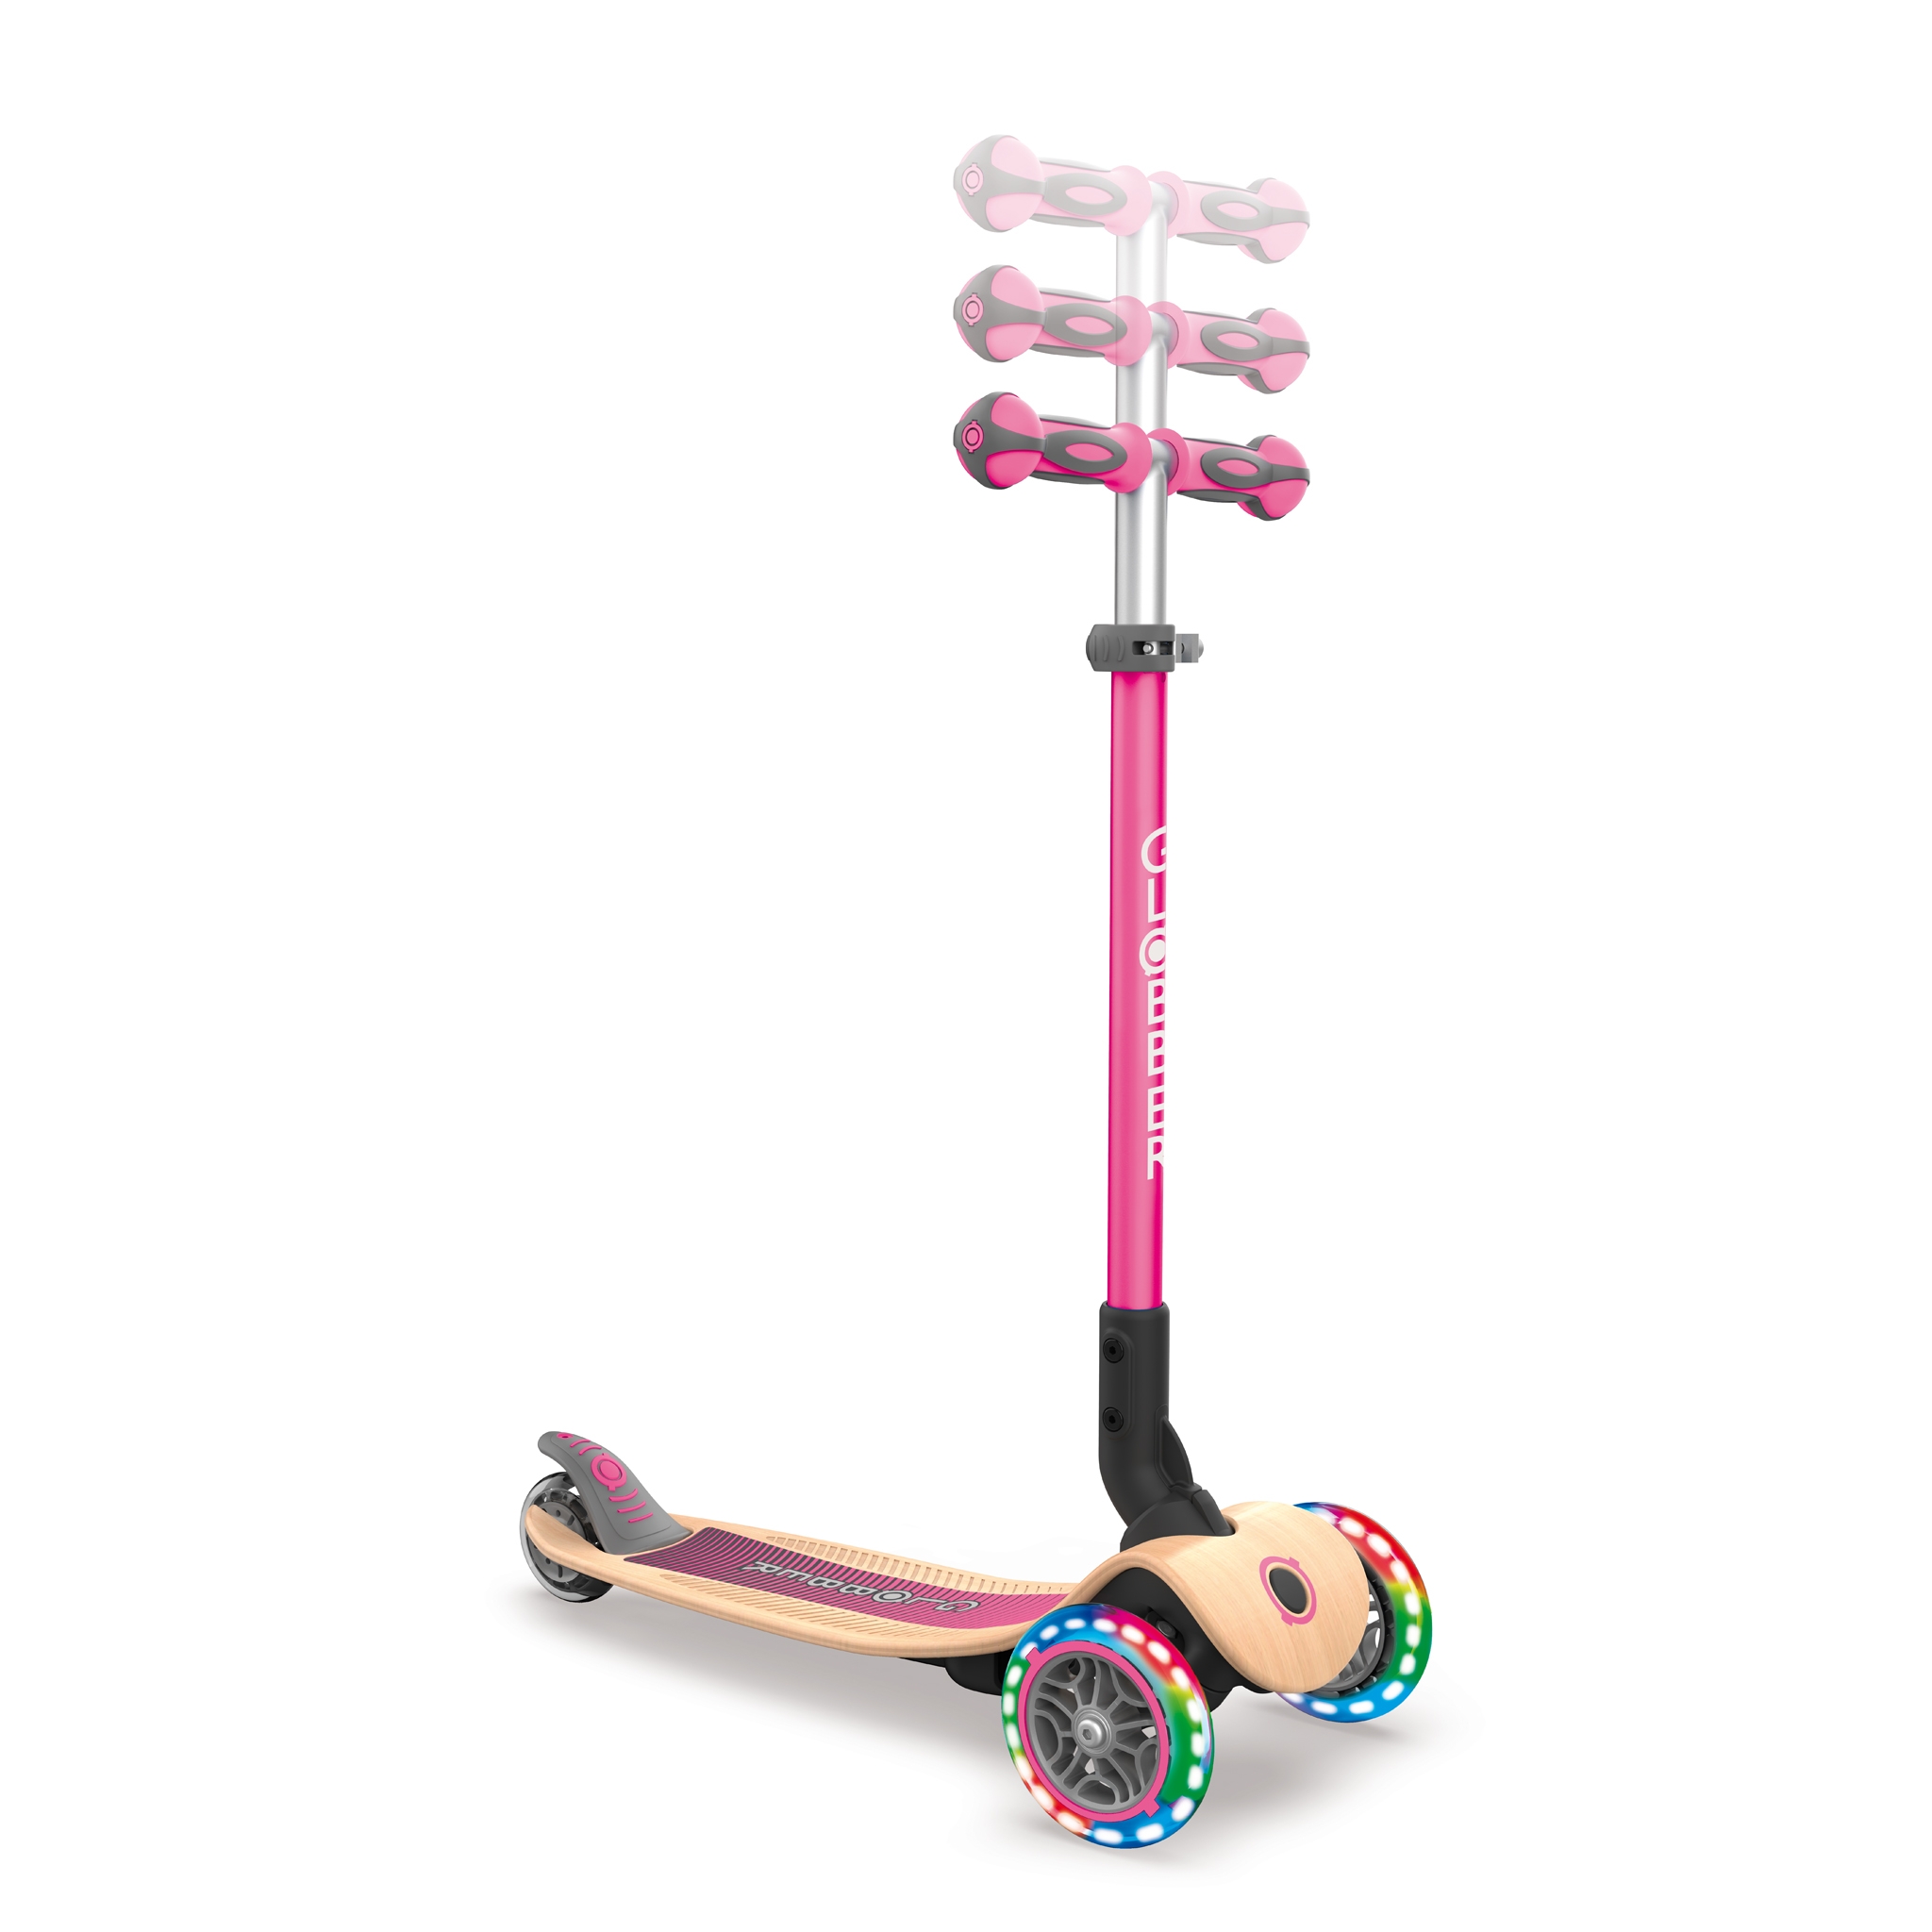 PRIMO-FOLDABLE-WOOD-LIGHTS-3-wheel-foldable-light-up-scooter-with-wooden-scooter-deck-and-3-height-adjustable-T-bar_deep-pink 1